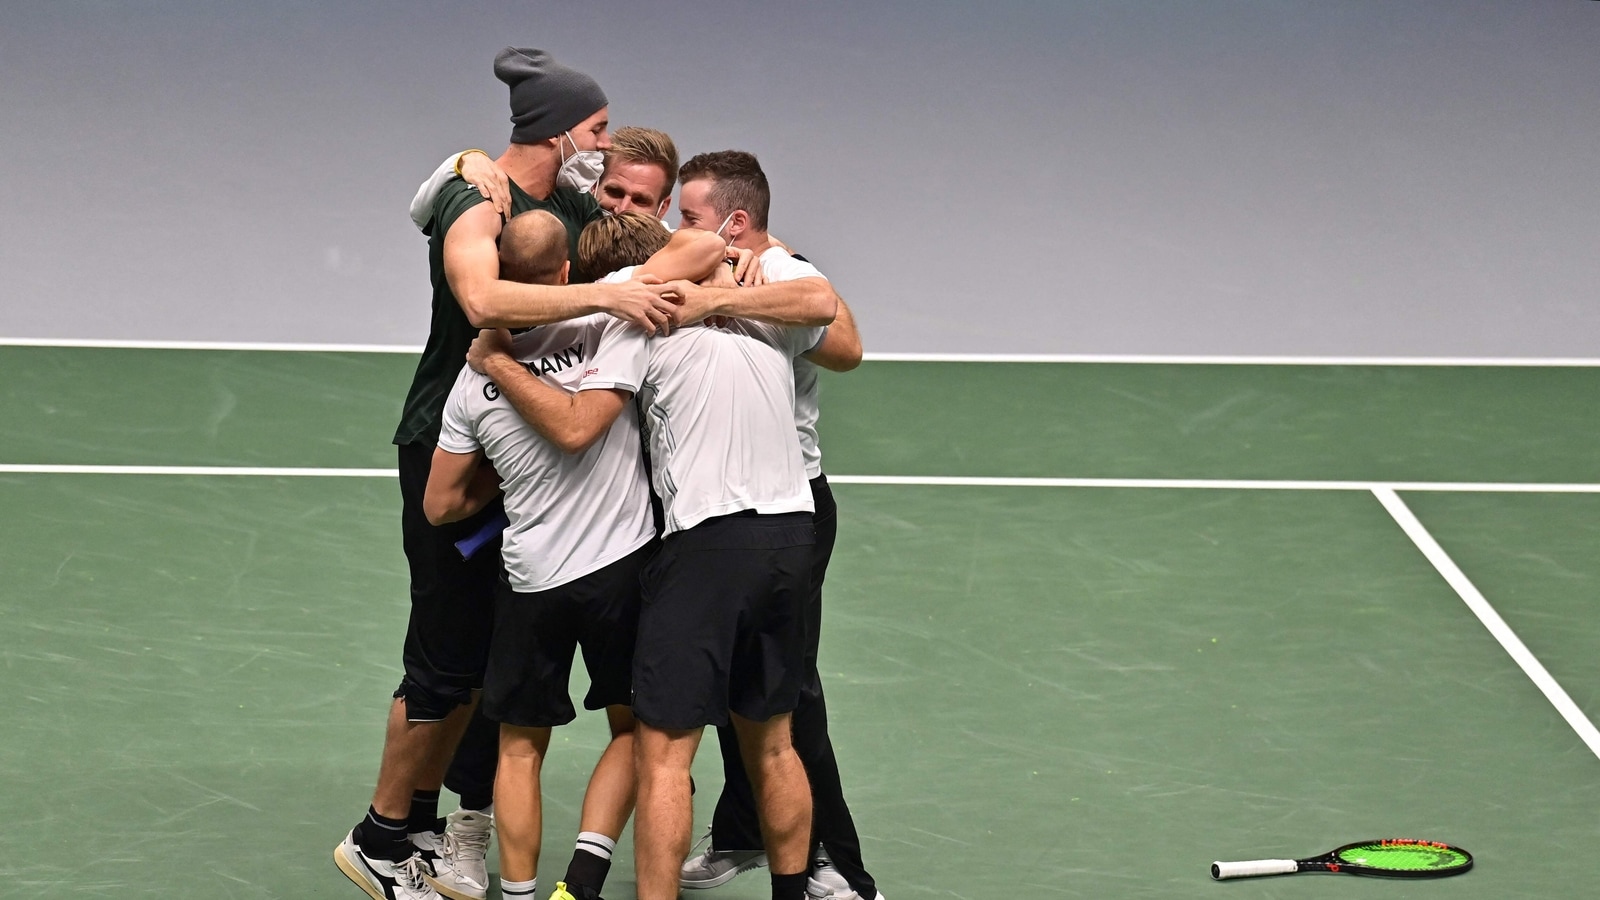 Germany beats Britain in Davis Cup for 1st semifinal since 2007 Tennis News